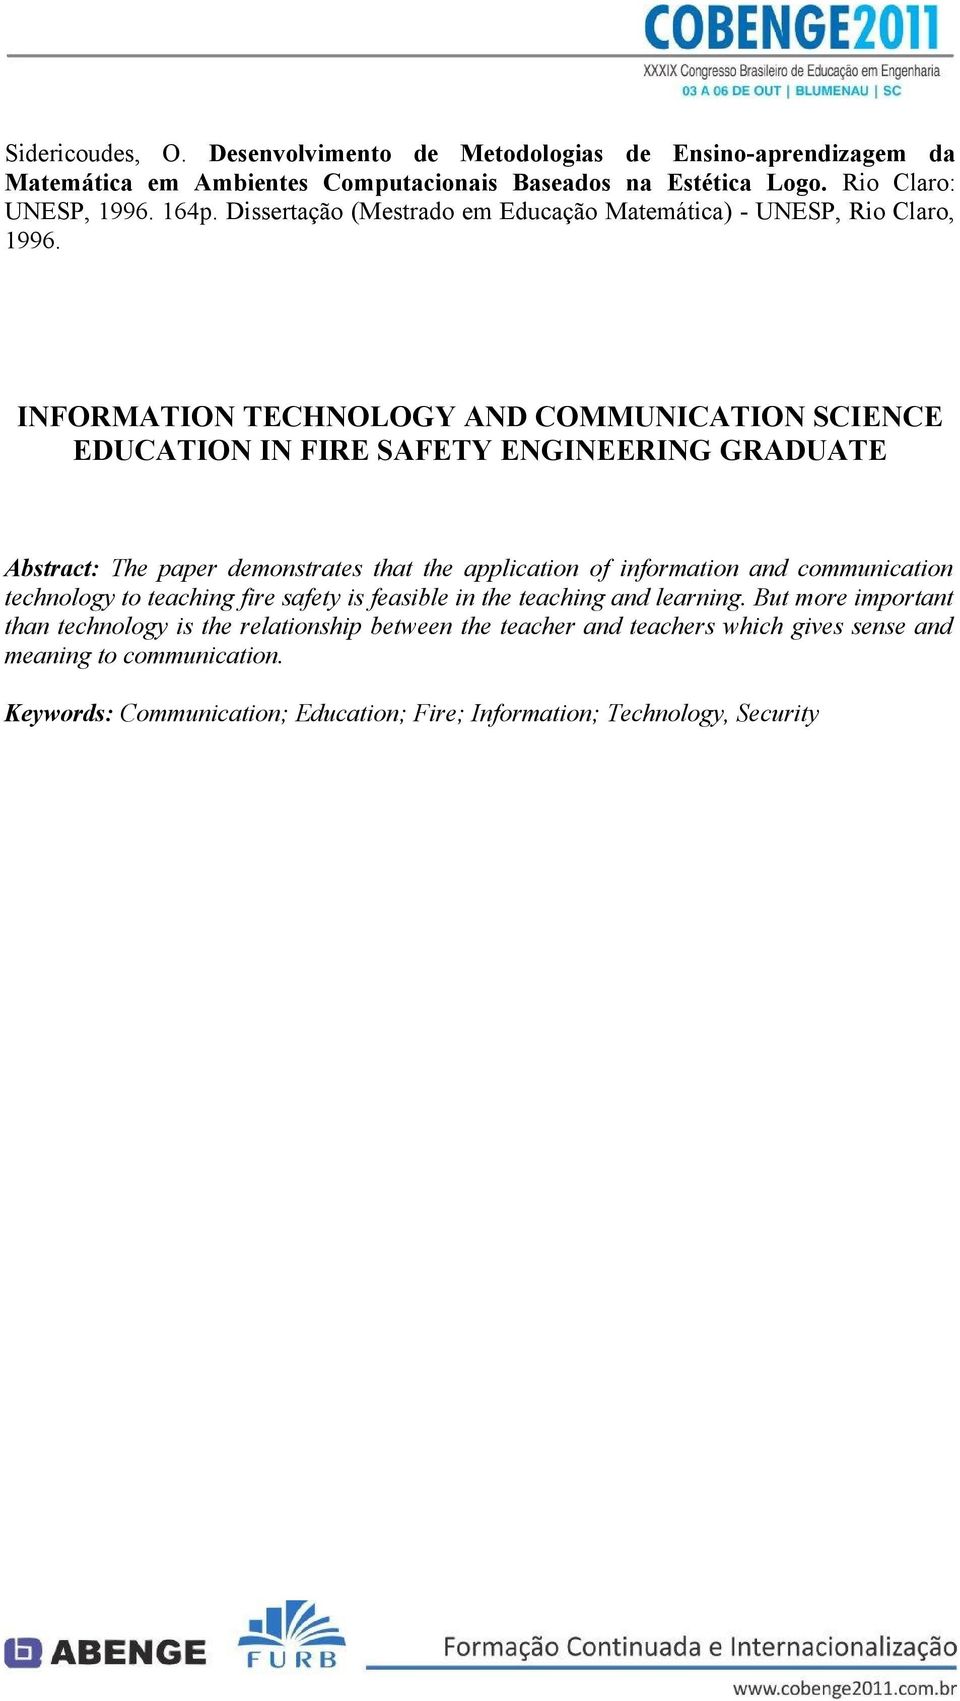 INFORMATION TECHNOLOGY AND COMMUNICATION SCIENCE EDUCATION IN FIRE SAFETY ENGINEERING GRADUATE Abstract: The paper demonstrates that the application of information and